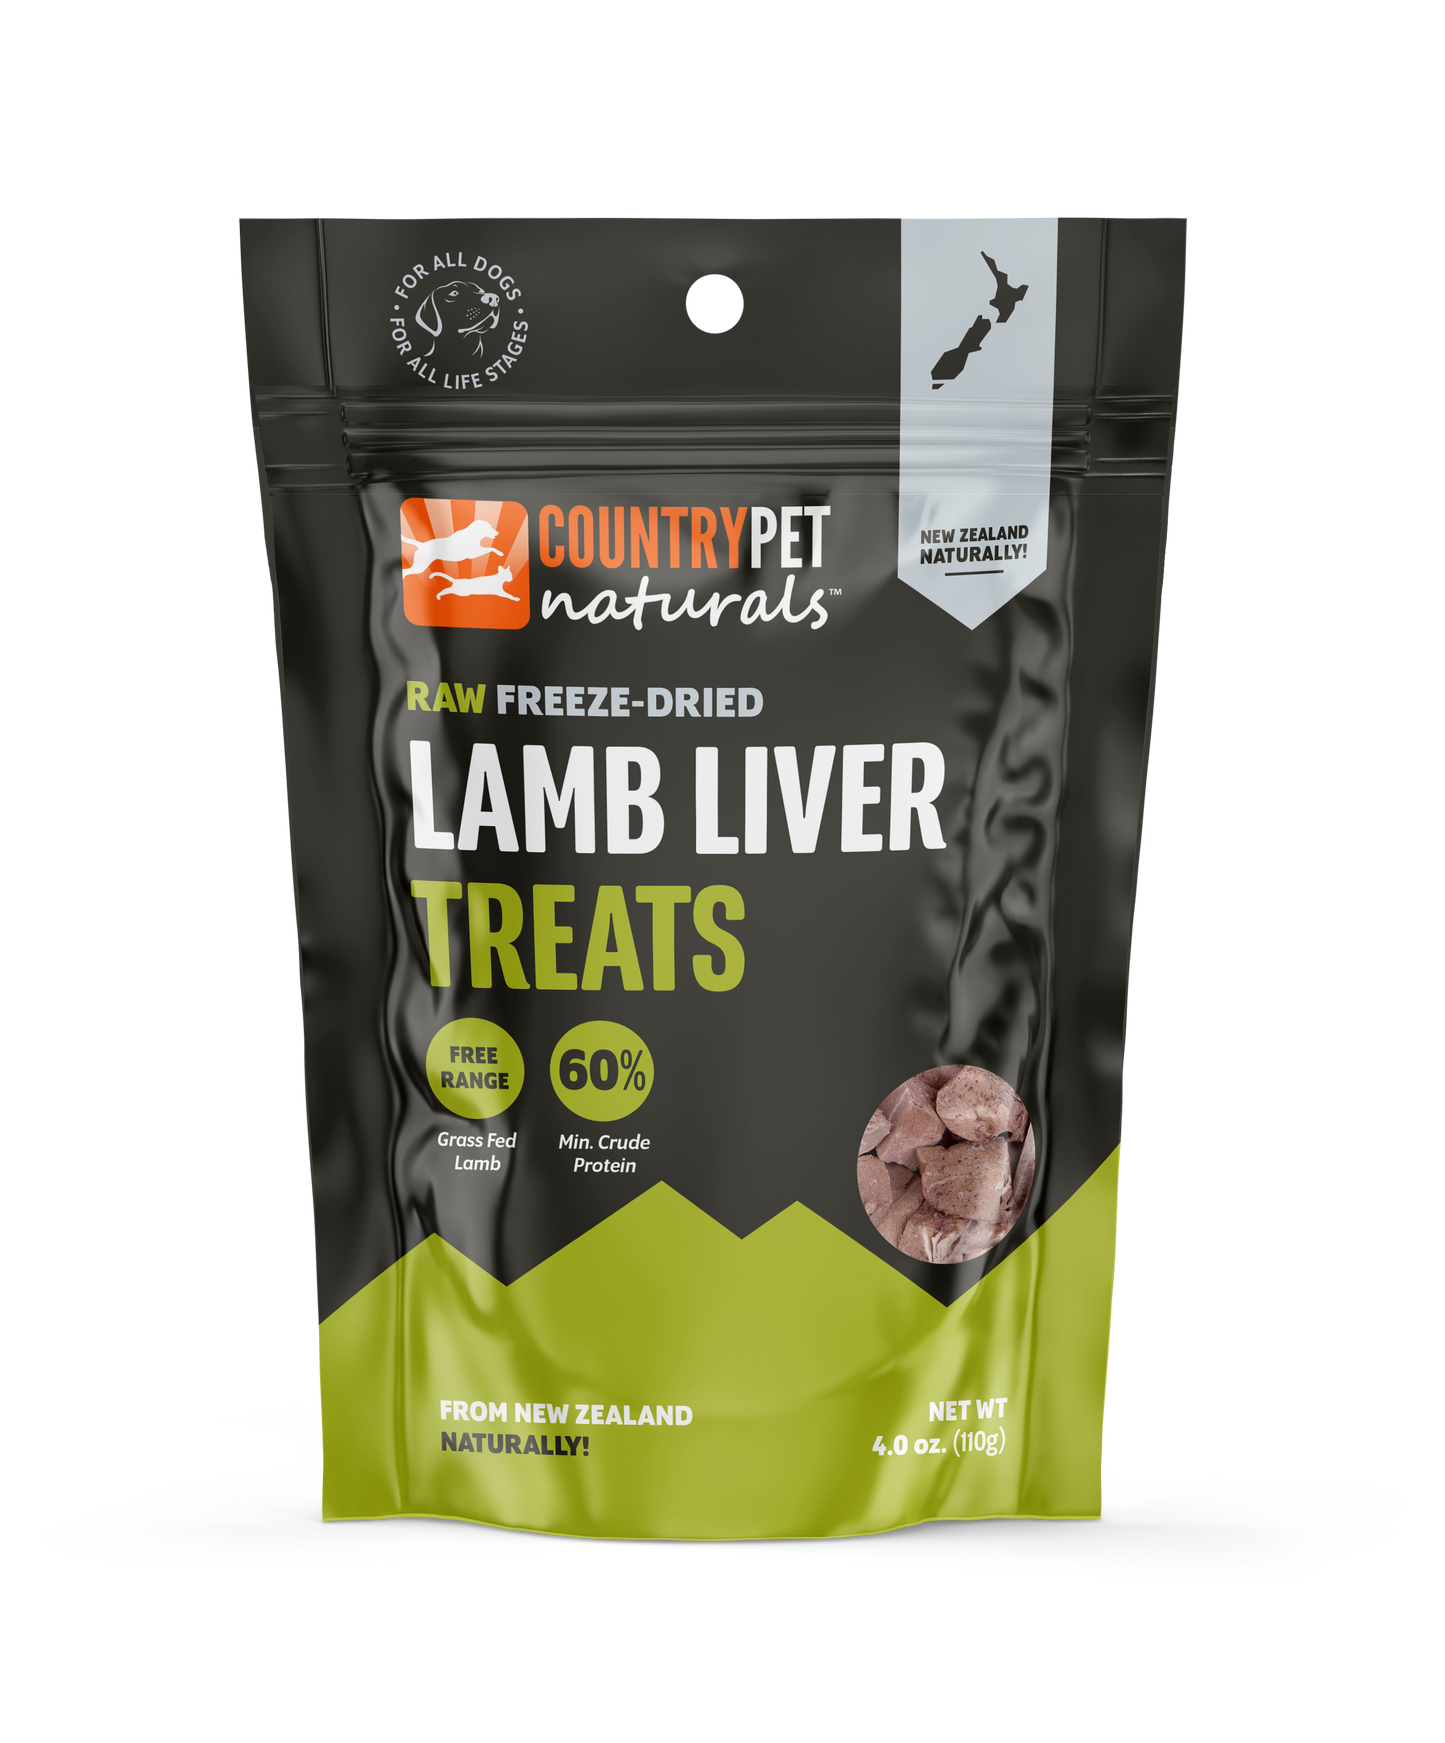 Wholesale - CountryPet Naturals - New Zealand Raw Freeze-Dried Lamb Liver Treats (case of 6 x 4oz)